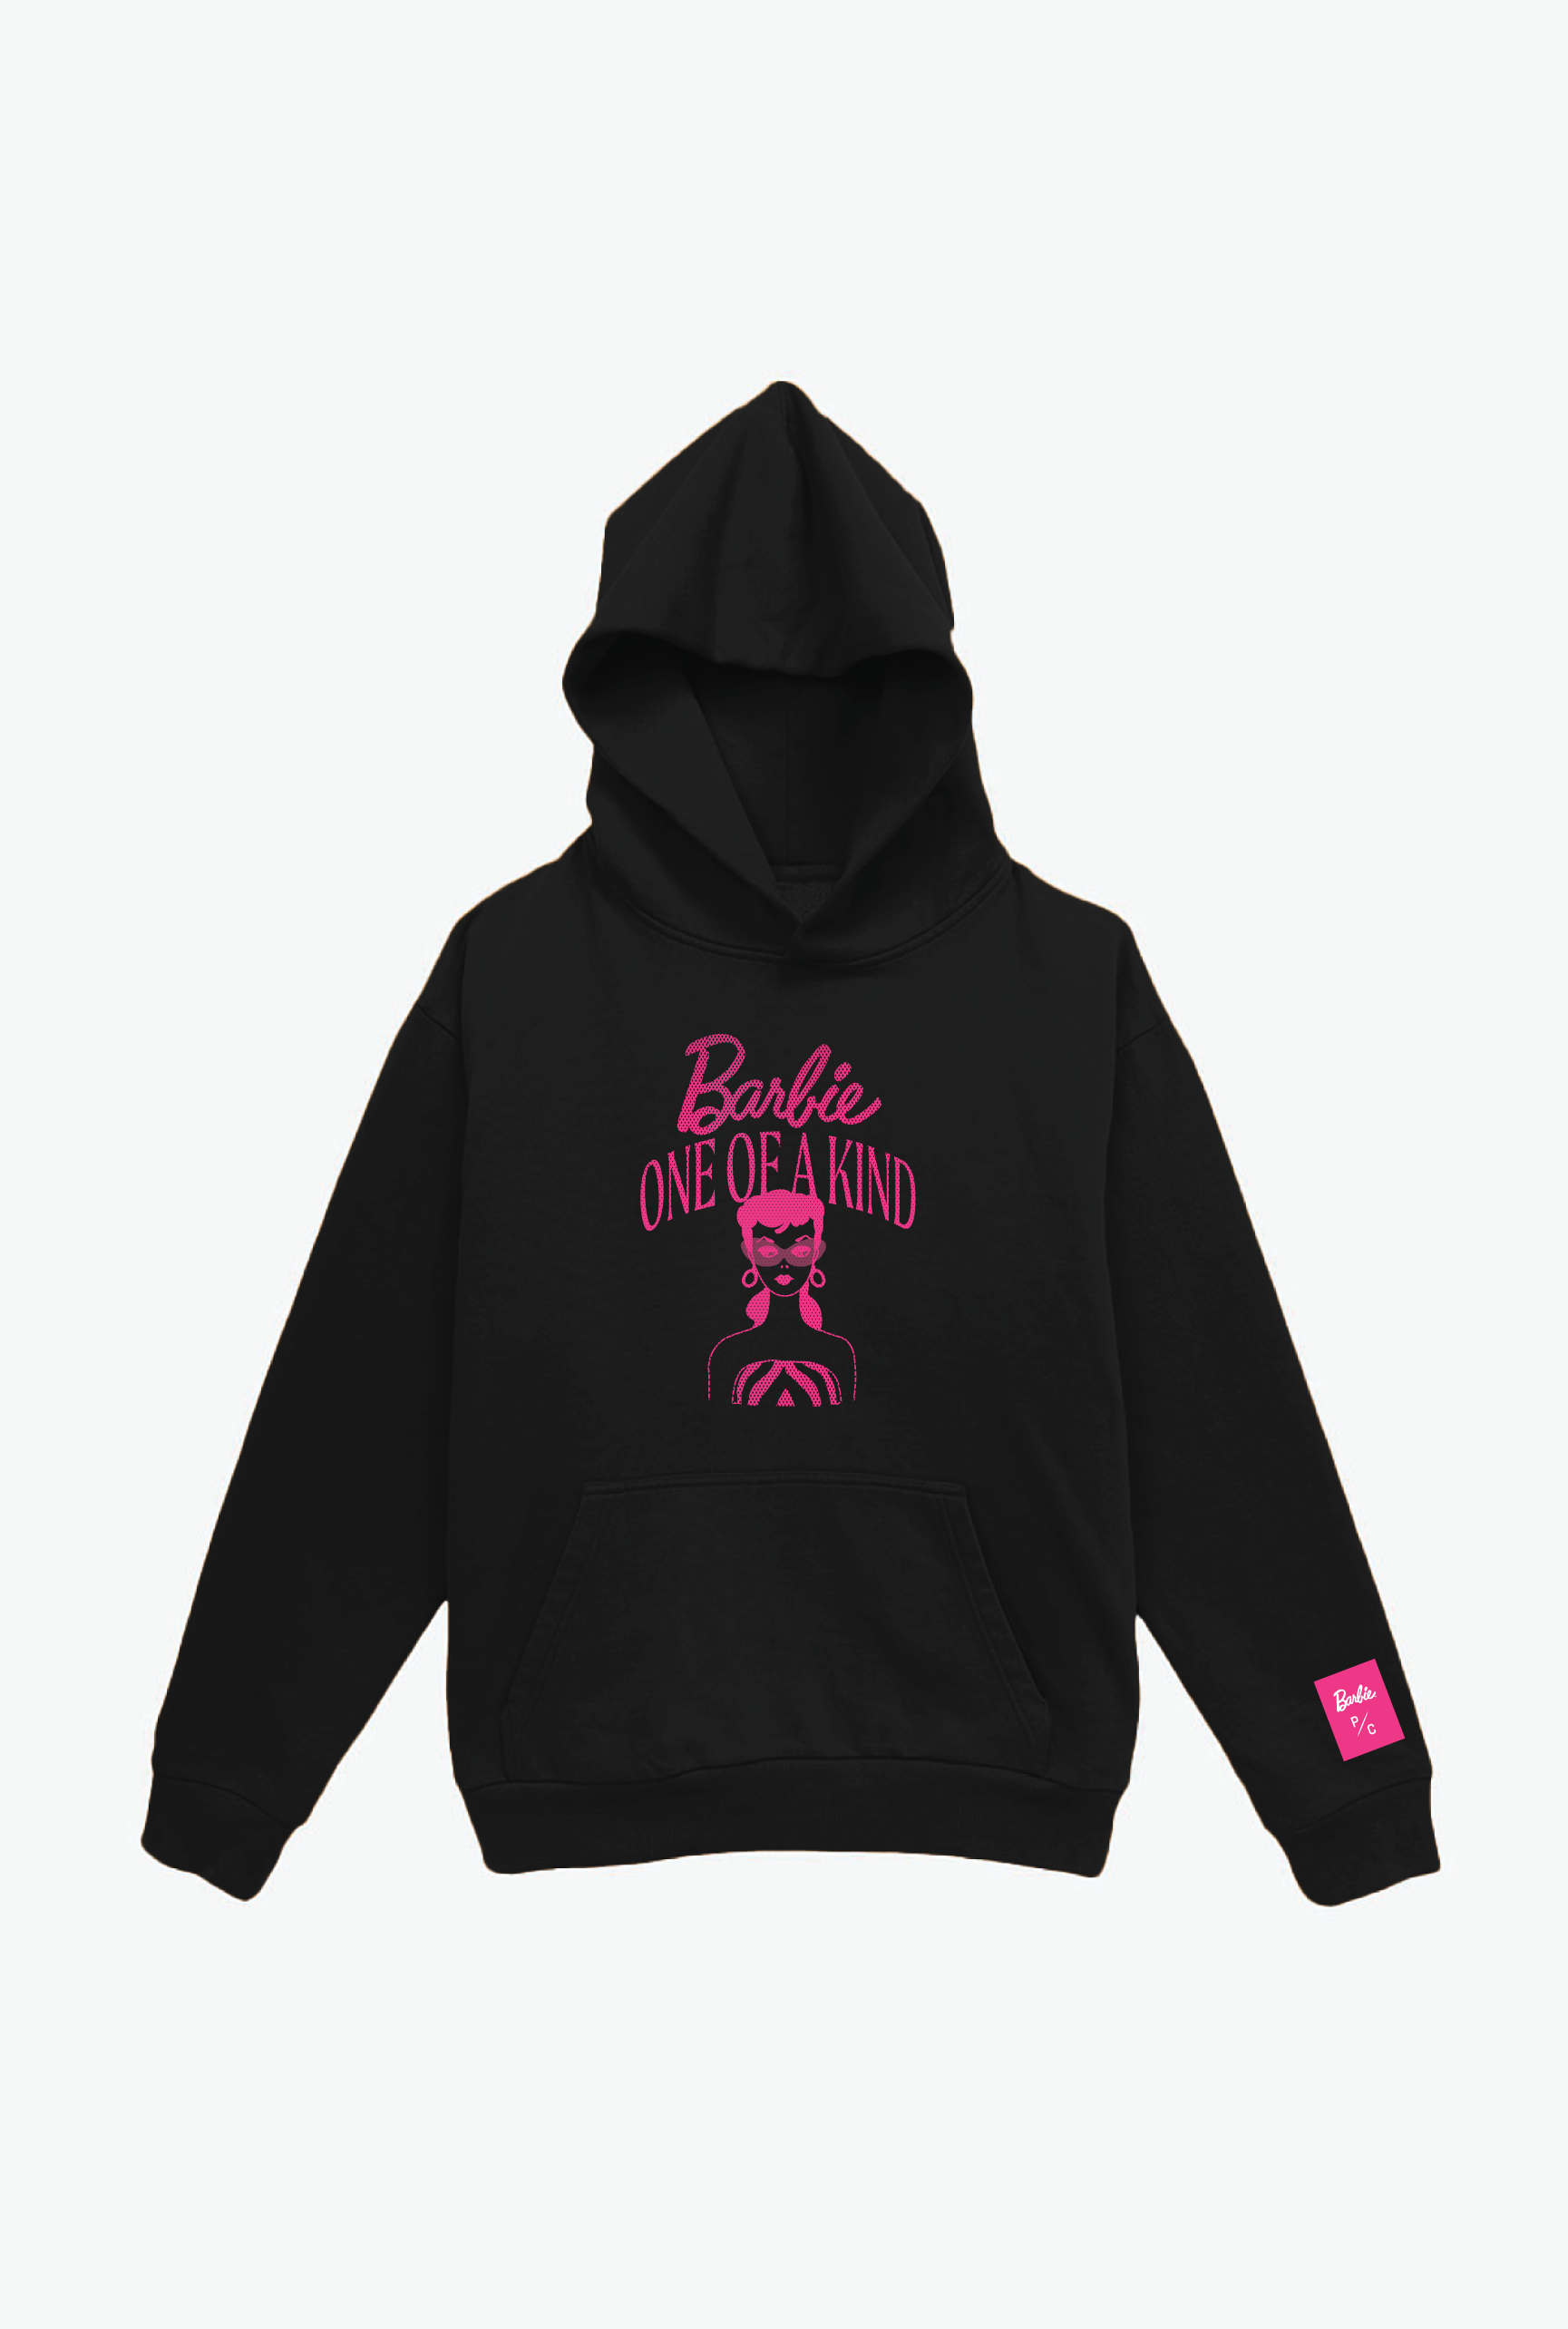 Barbie One Of A Kind Heavyweight Graphic Hoodie - Washed Black